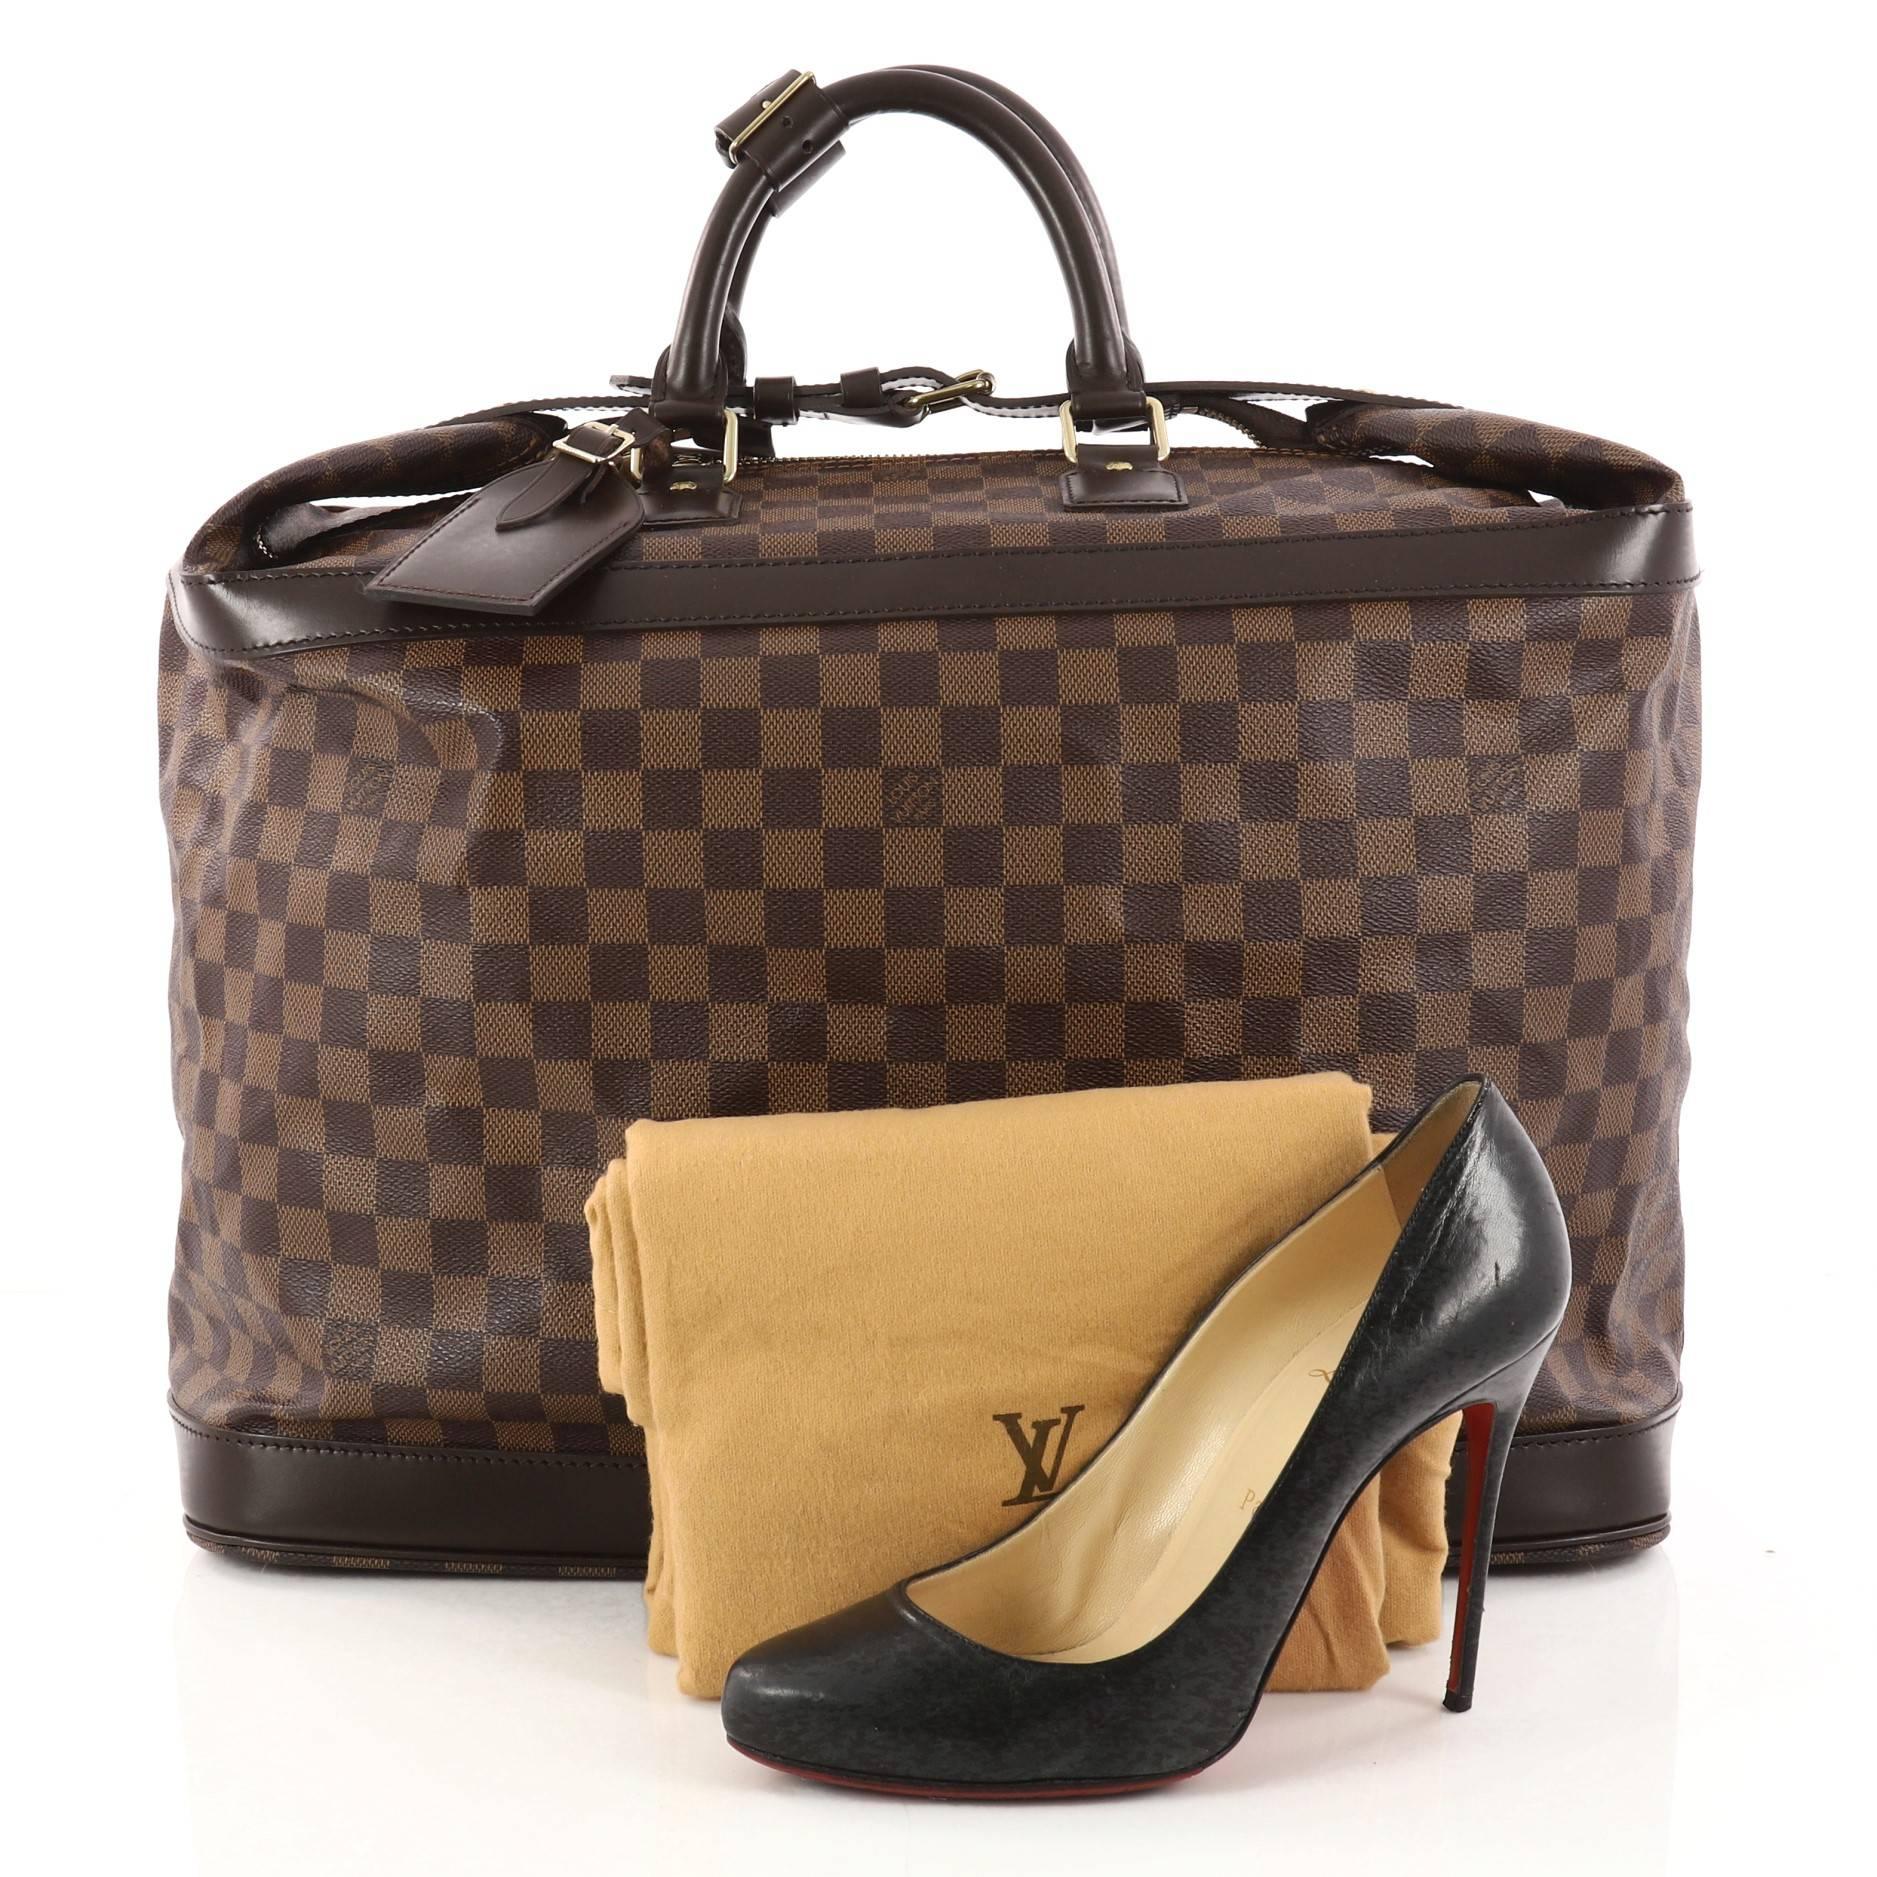 This authentic Louis Vuitton Cruiser Handbag Damier 45 showcases the brand's timeless and luxurious style and functionality. Crafted in Louis Vuitton's iconic damier ebene coated canvas, this chic travel luggage features dual-rolled handles, dark